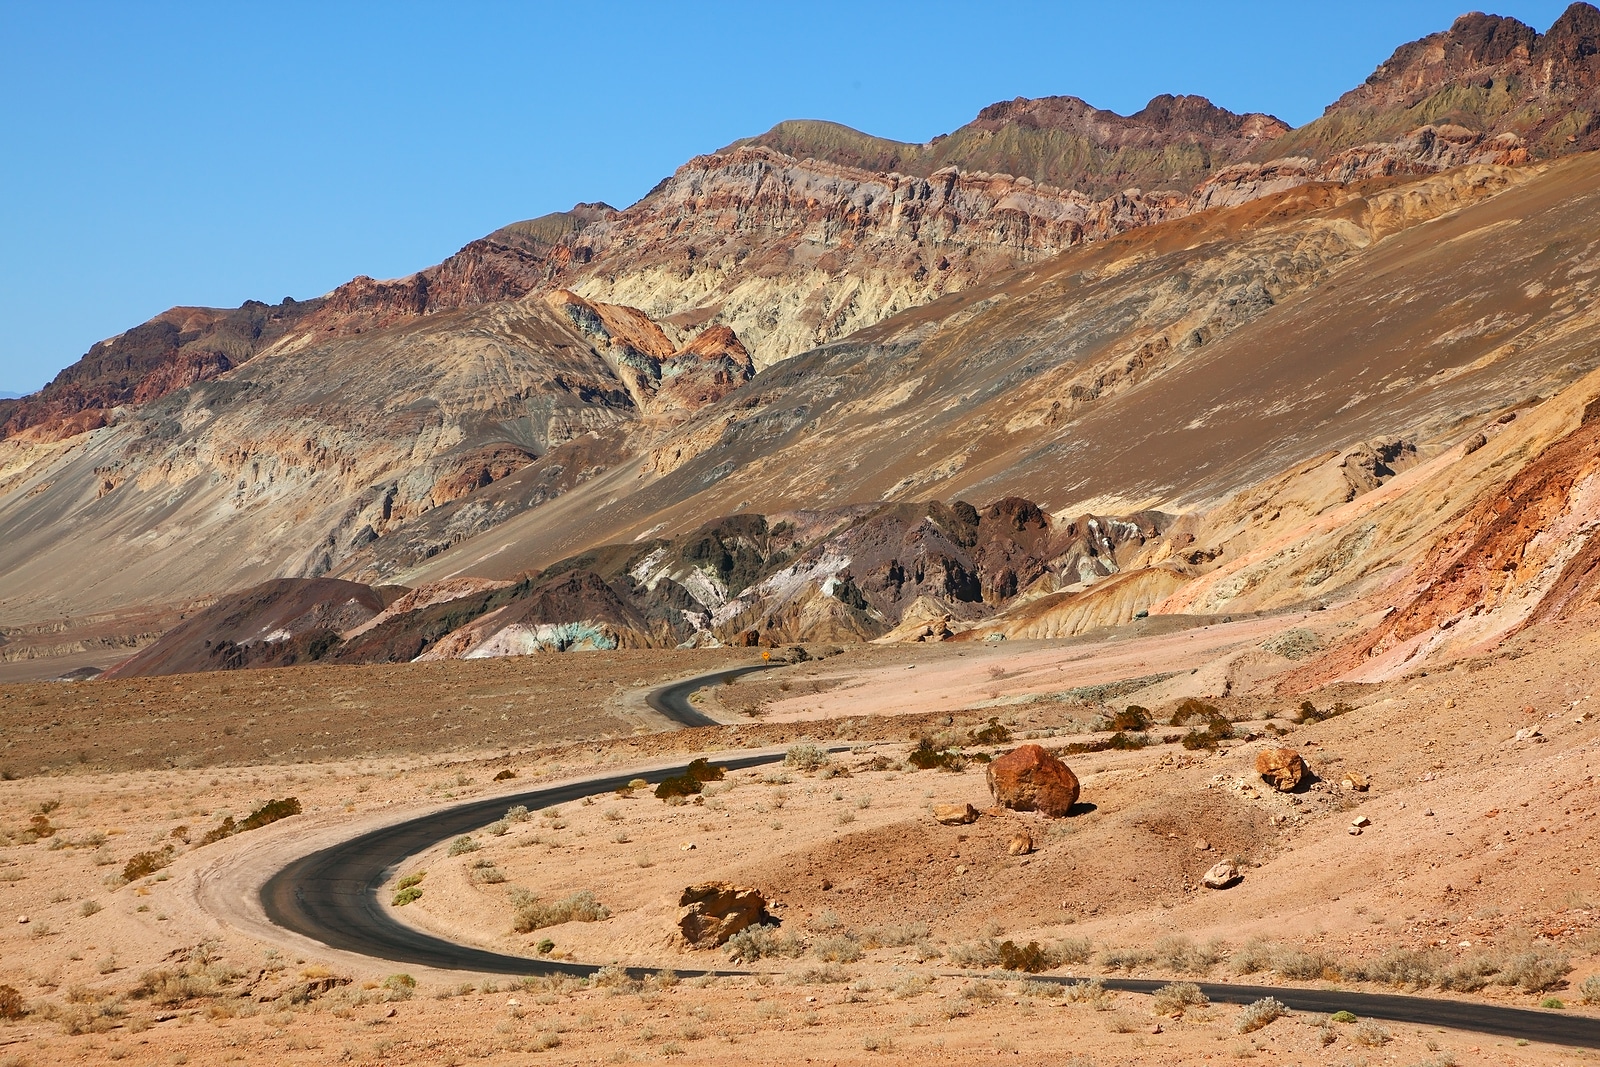 Excellent road winding through Death Valley in the USA. The desert and mountains of California.